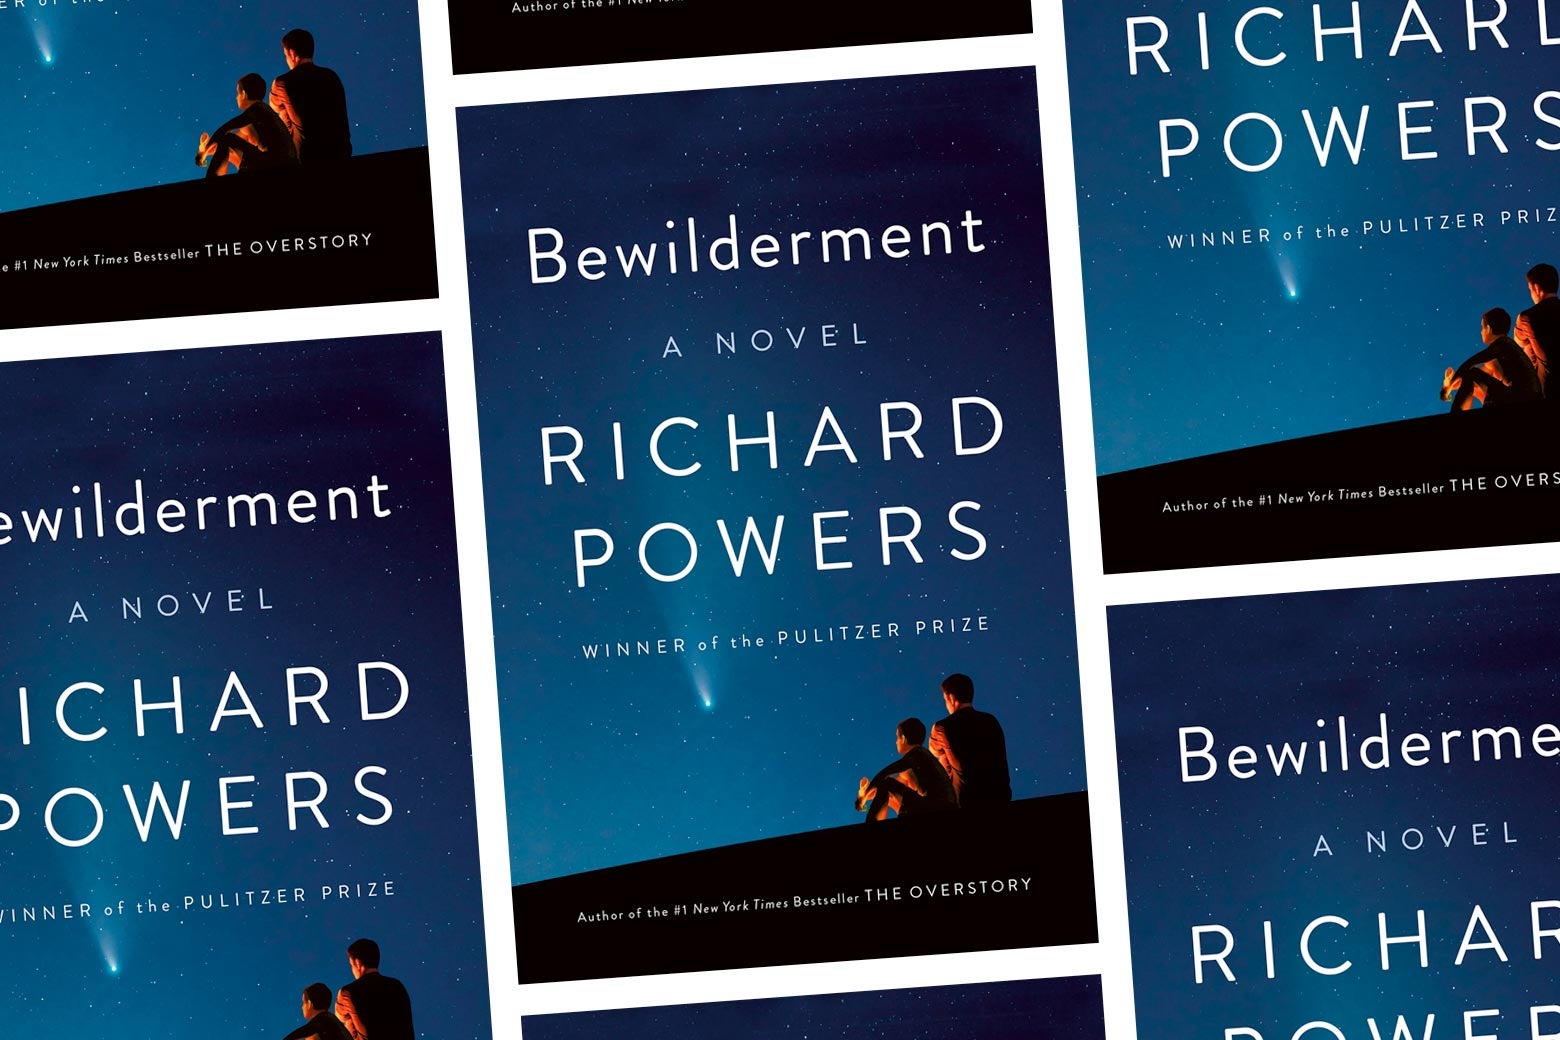 The cover of Richard Powers' Bewilderment.